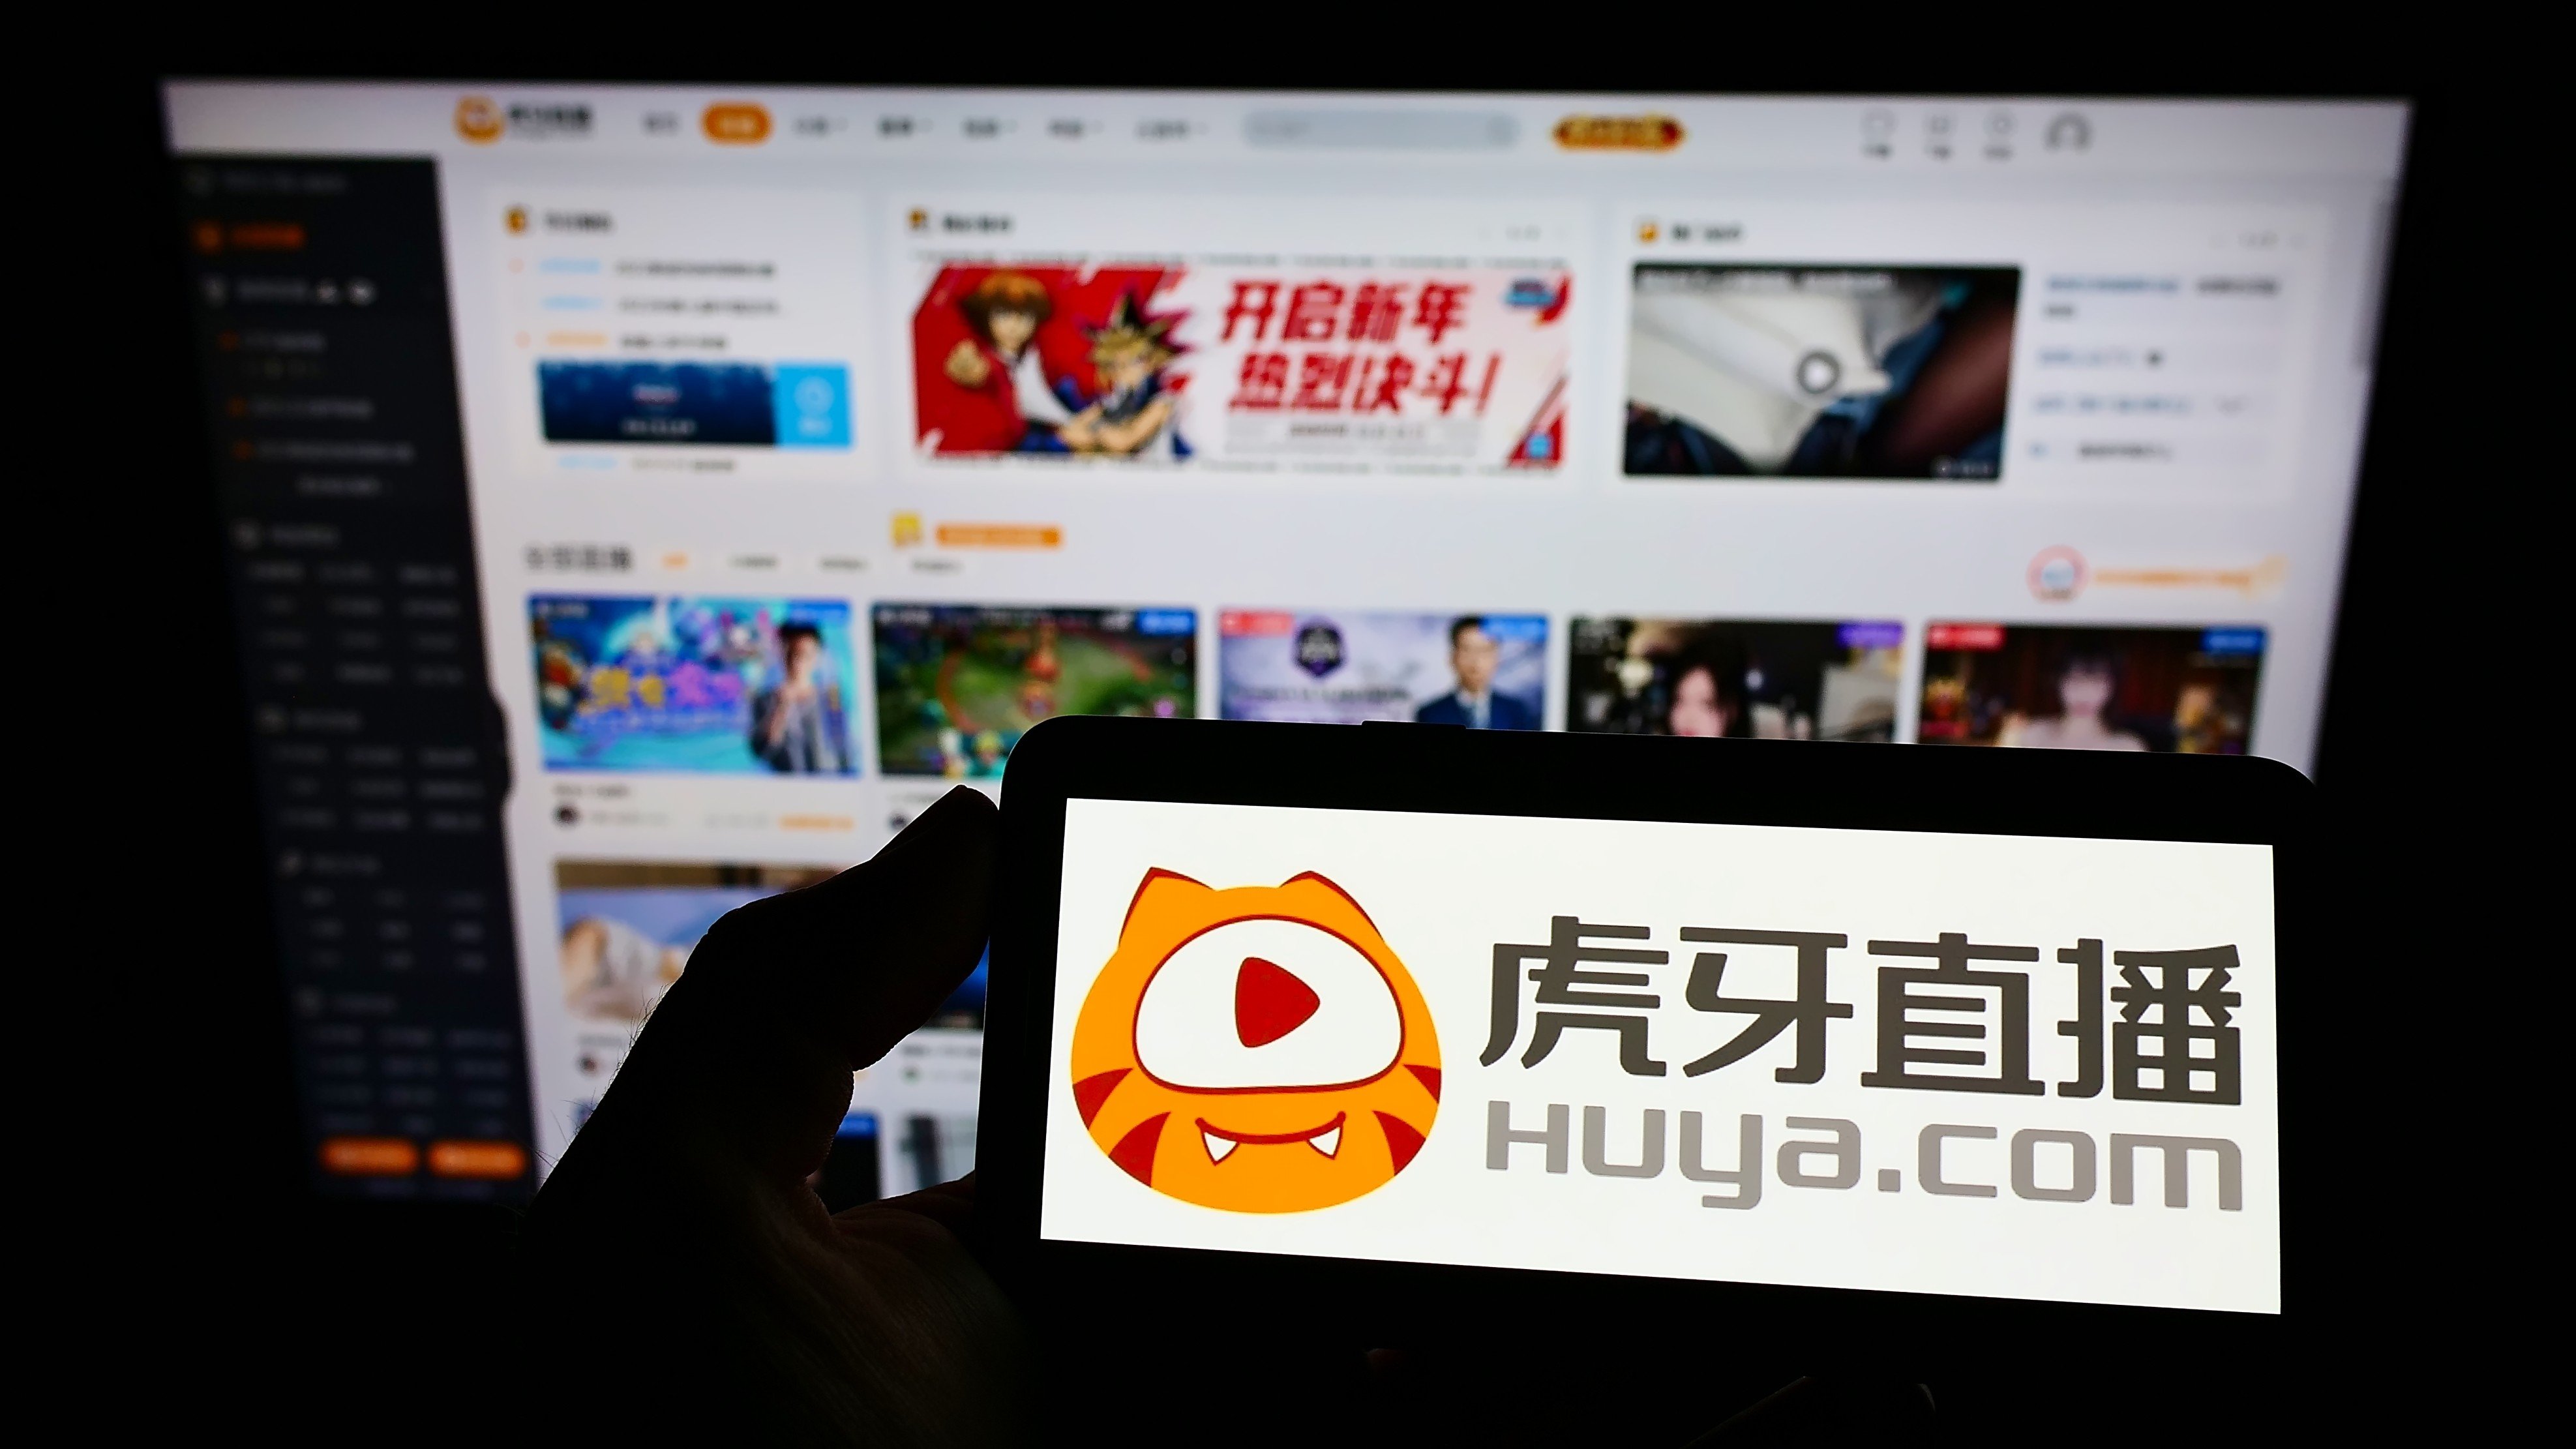 Tencent-backed Huya is one of China’s leading video game live-streaming platforms. Fresh rumors have emerged about a merger with Douyu, also backed by Tencent, but regulators quashed a similar plan in 2020. Photo: Shutterstock